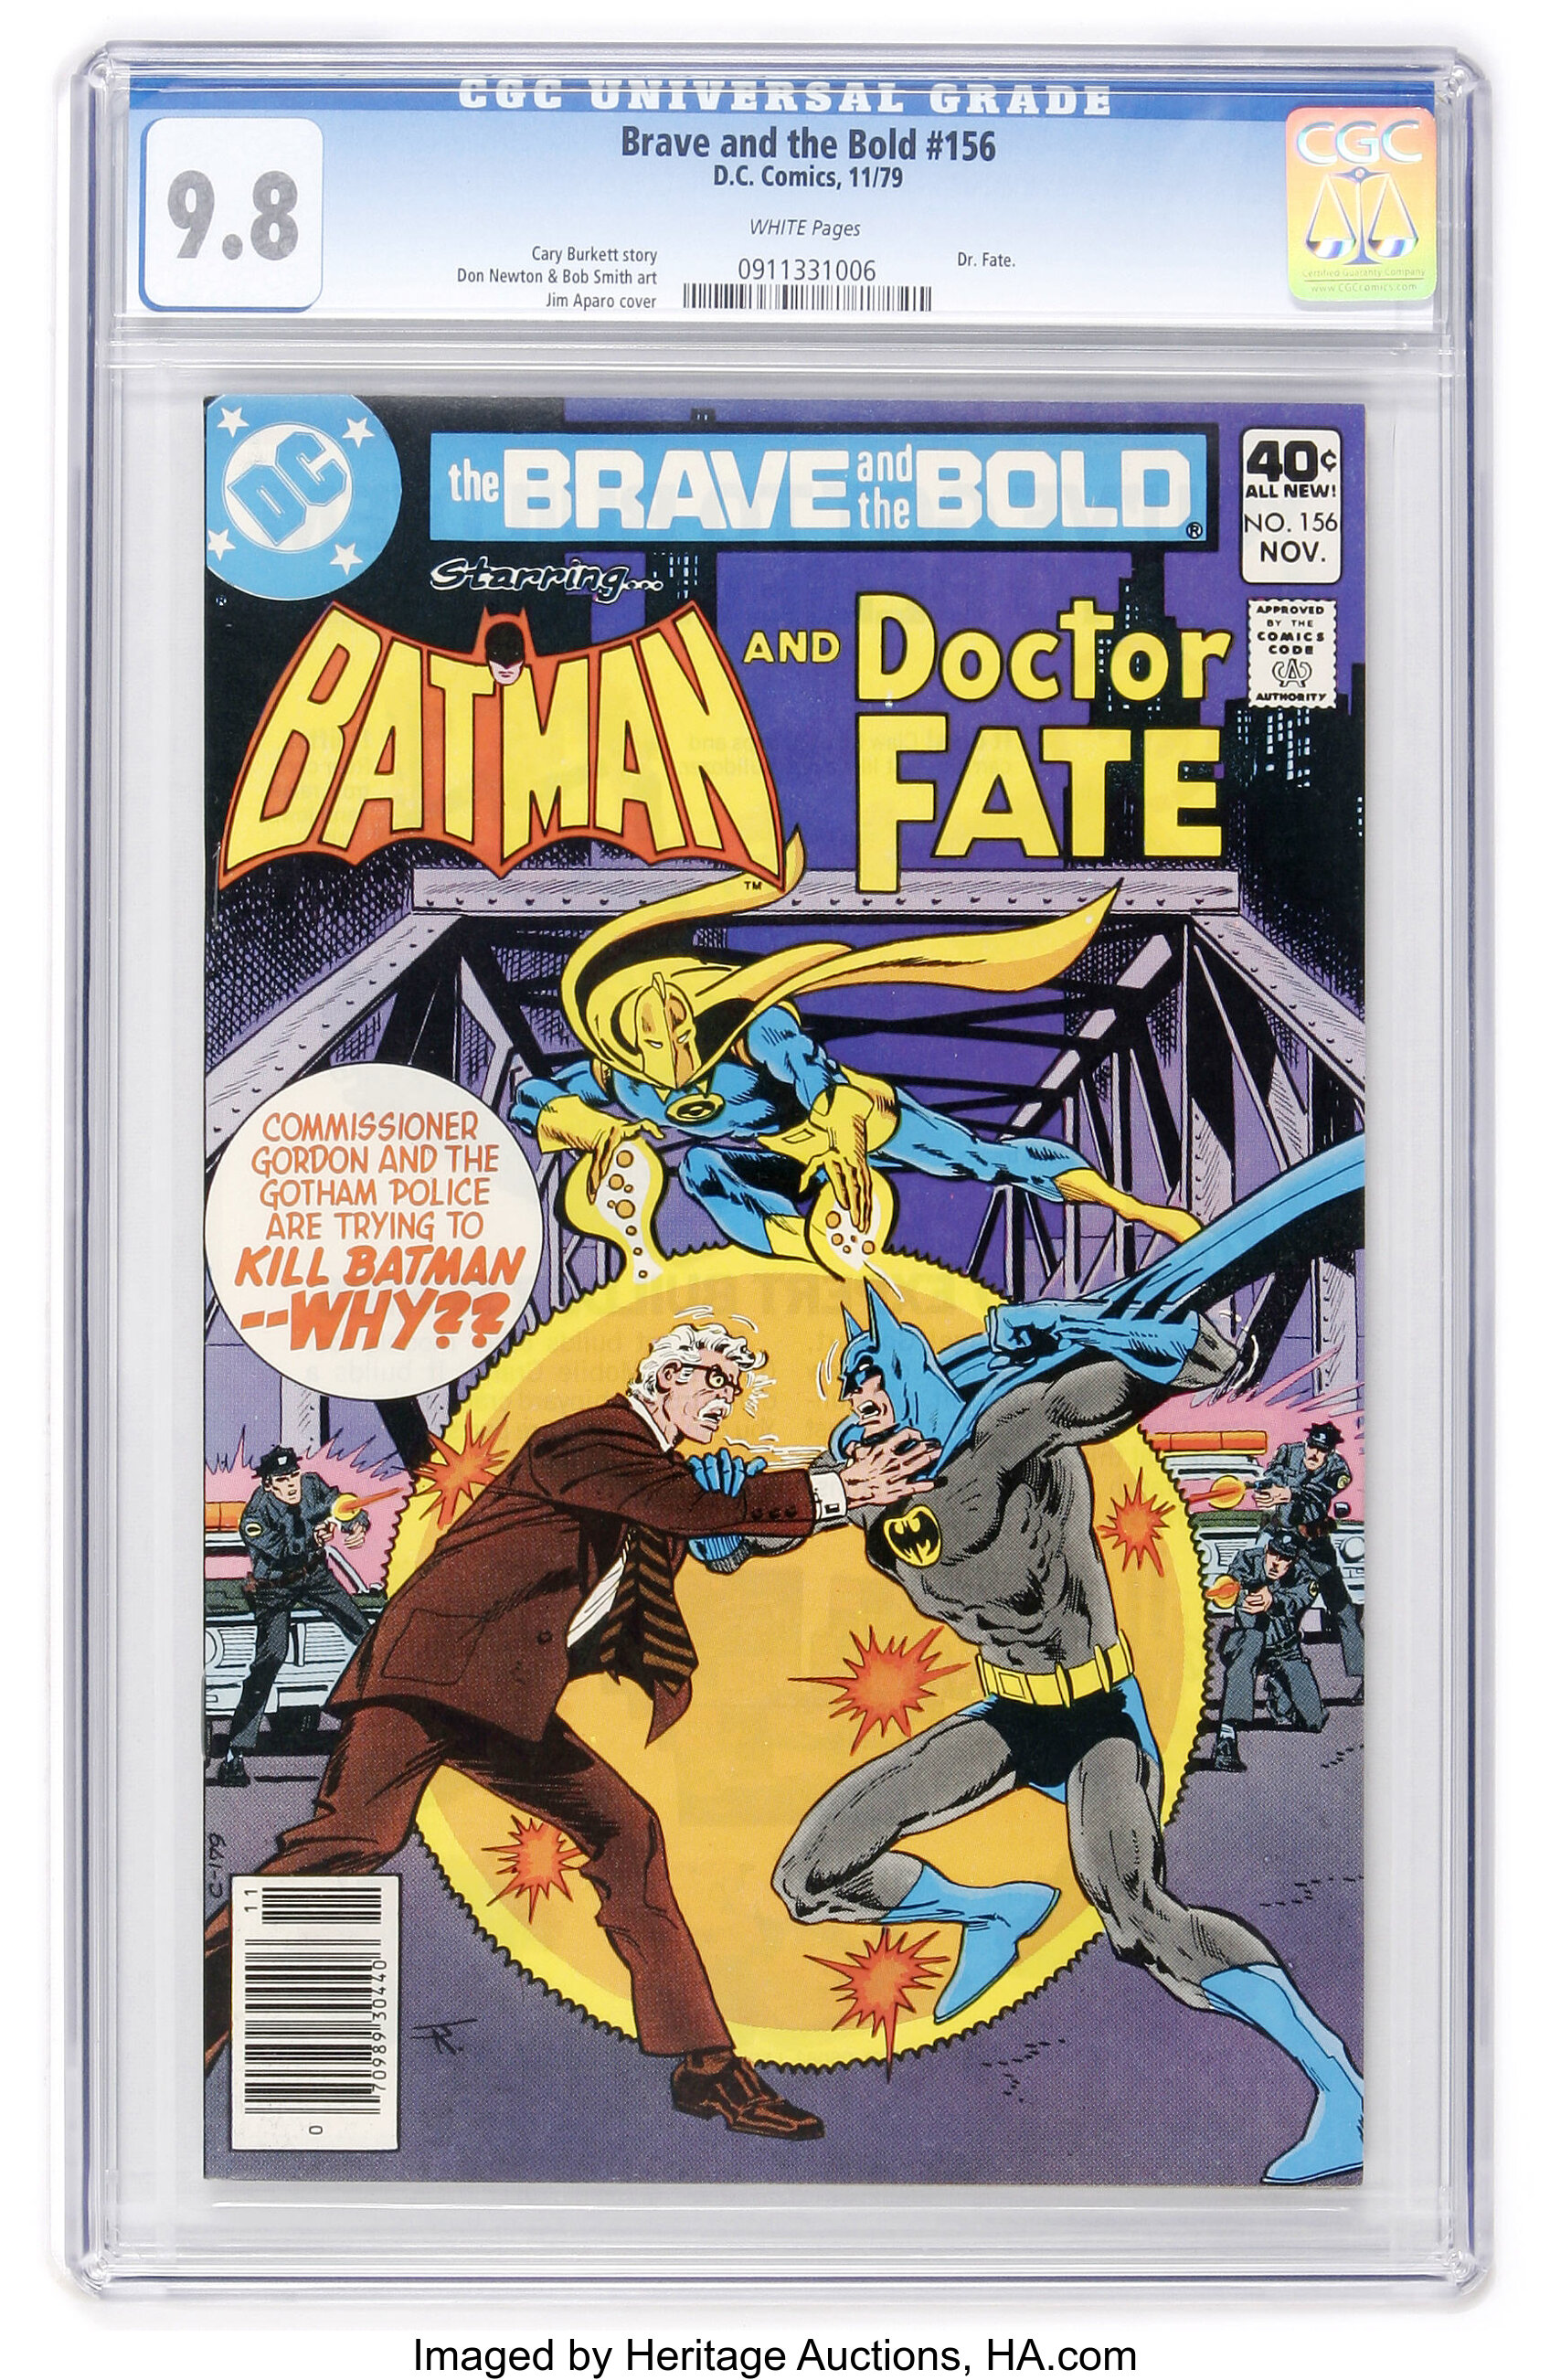 The Brave and the Bold #156 Batman and Dr. Fate - Slobodian | Lot #11117 |  Heritage Auctions